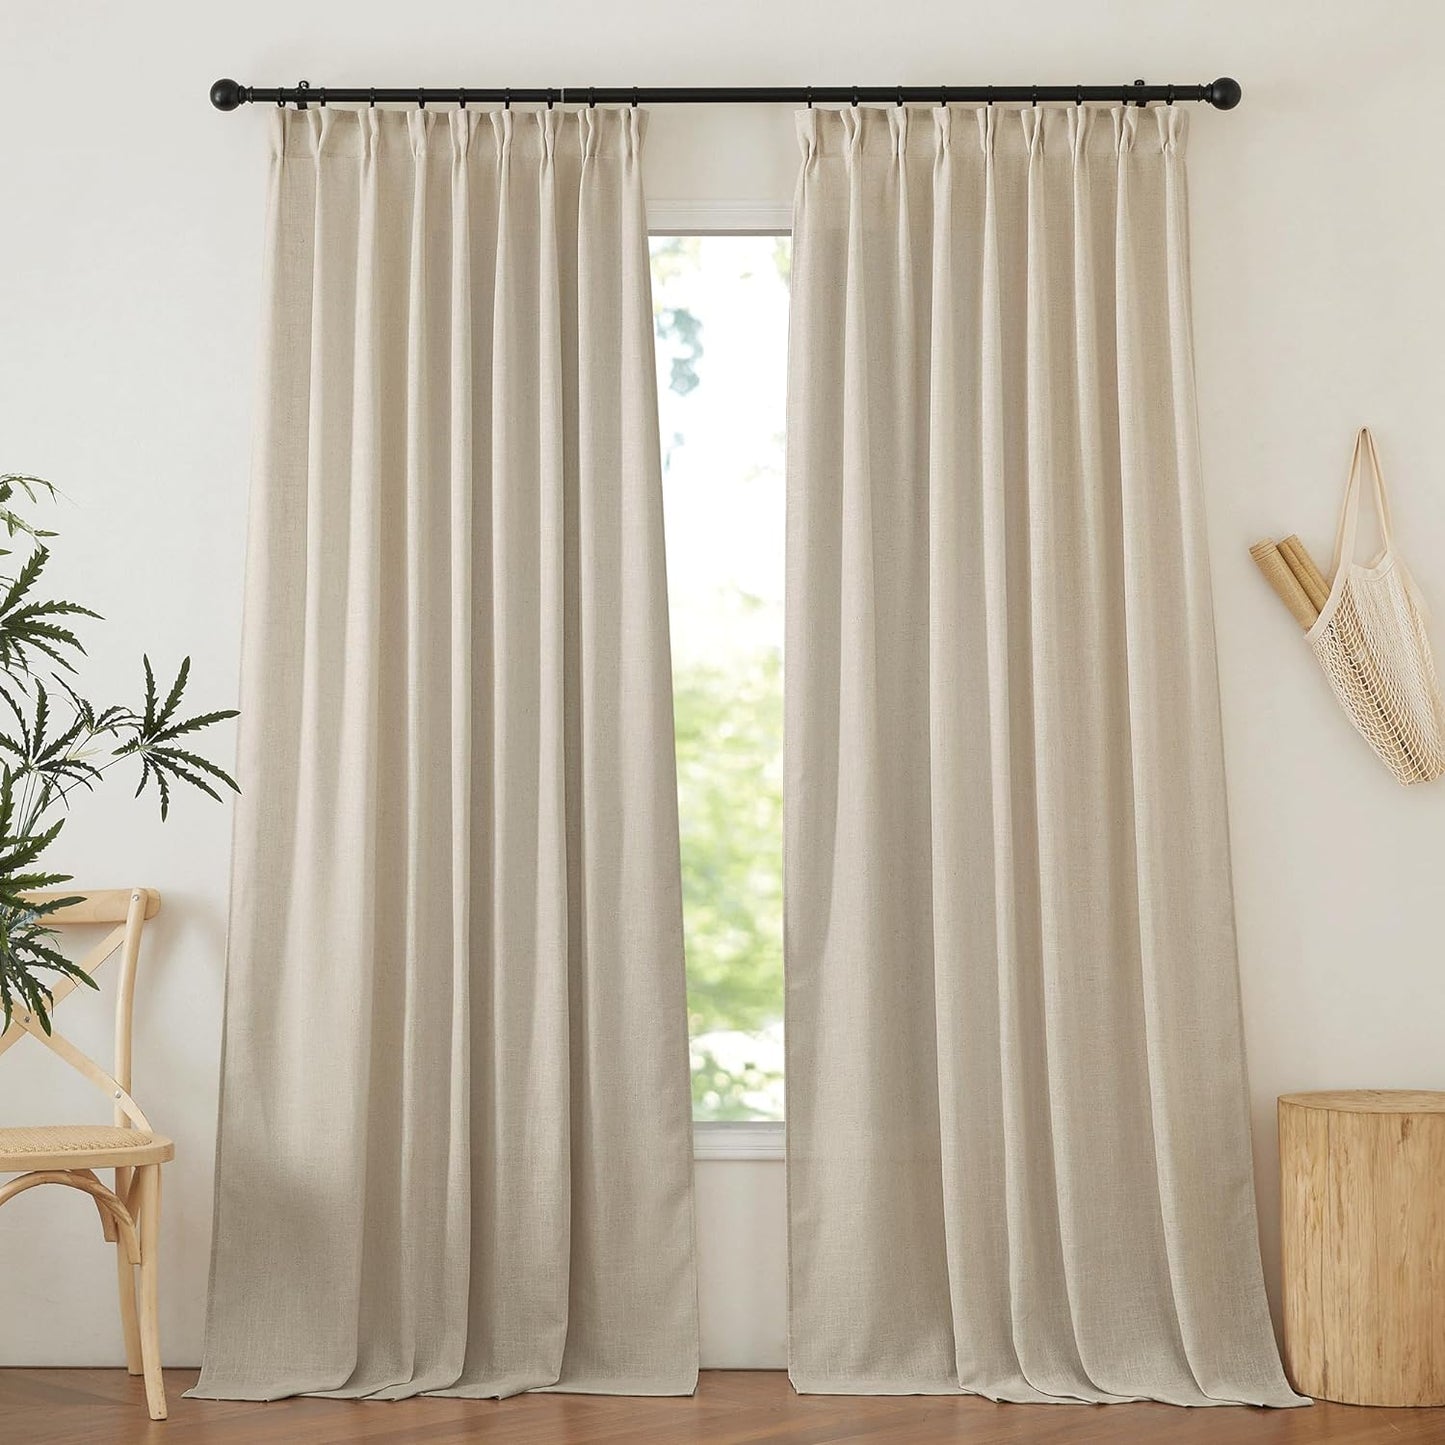 NICETOWN Linen Textured Curtain for Bedroom/Living Room Thermal Insulated Back Tab Linen Look Curtain Drapes Soft Rich Material Light Reducing Drape Panels for Window, 2 Panels, 52 X 84 Inch, Linen  NICETOWN Taupe W52 X L108 